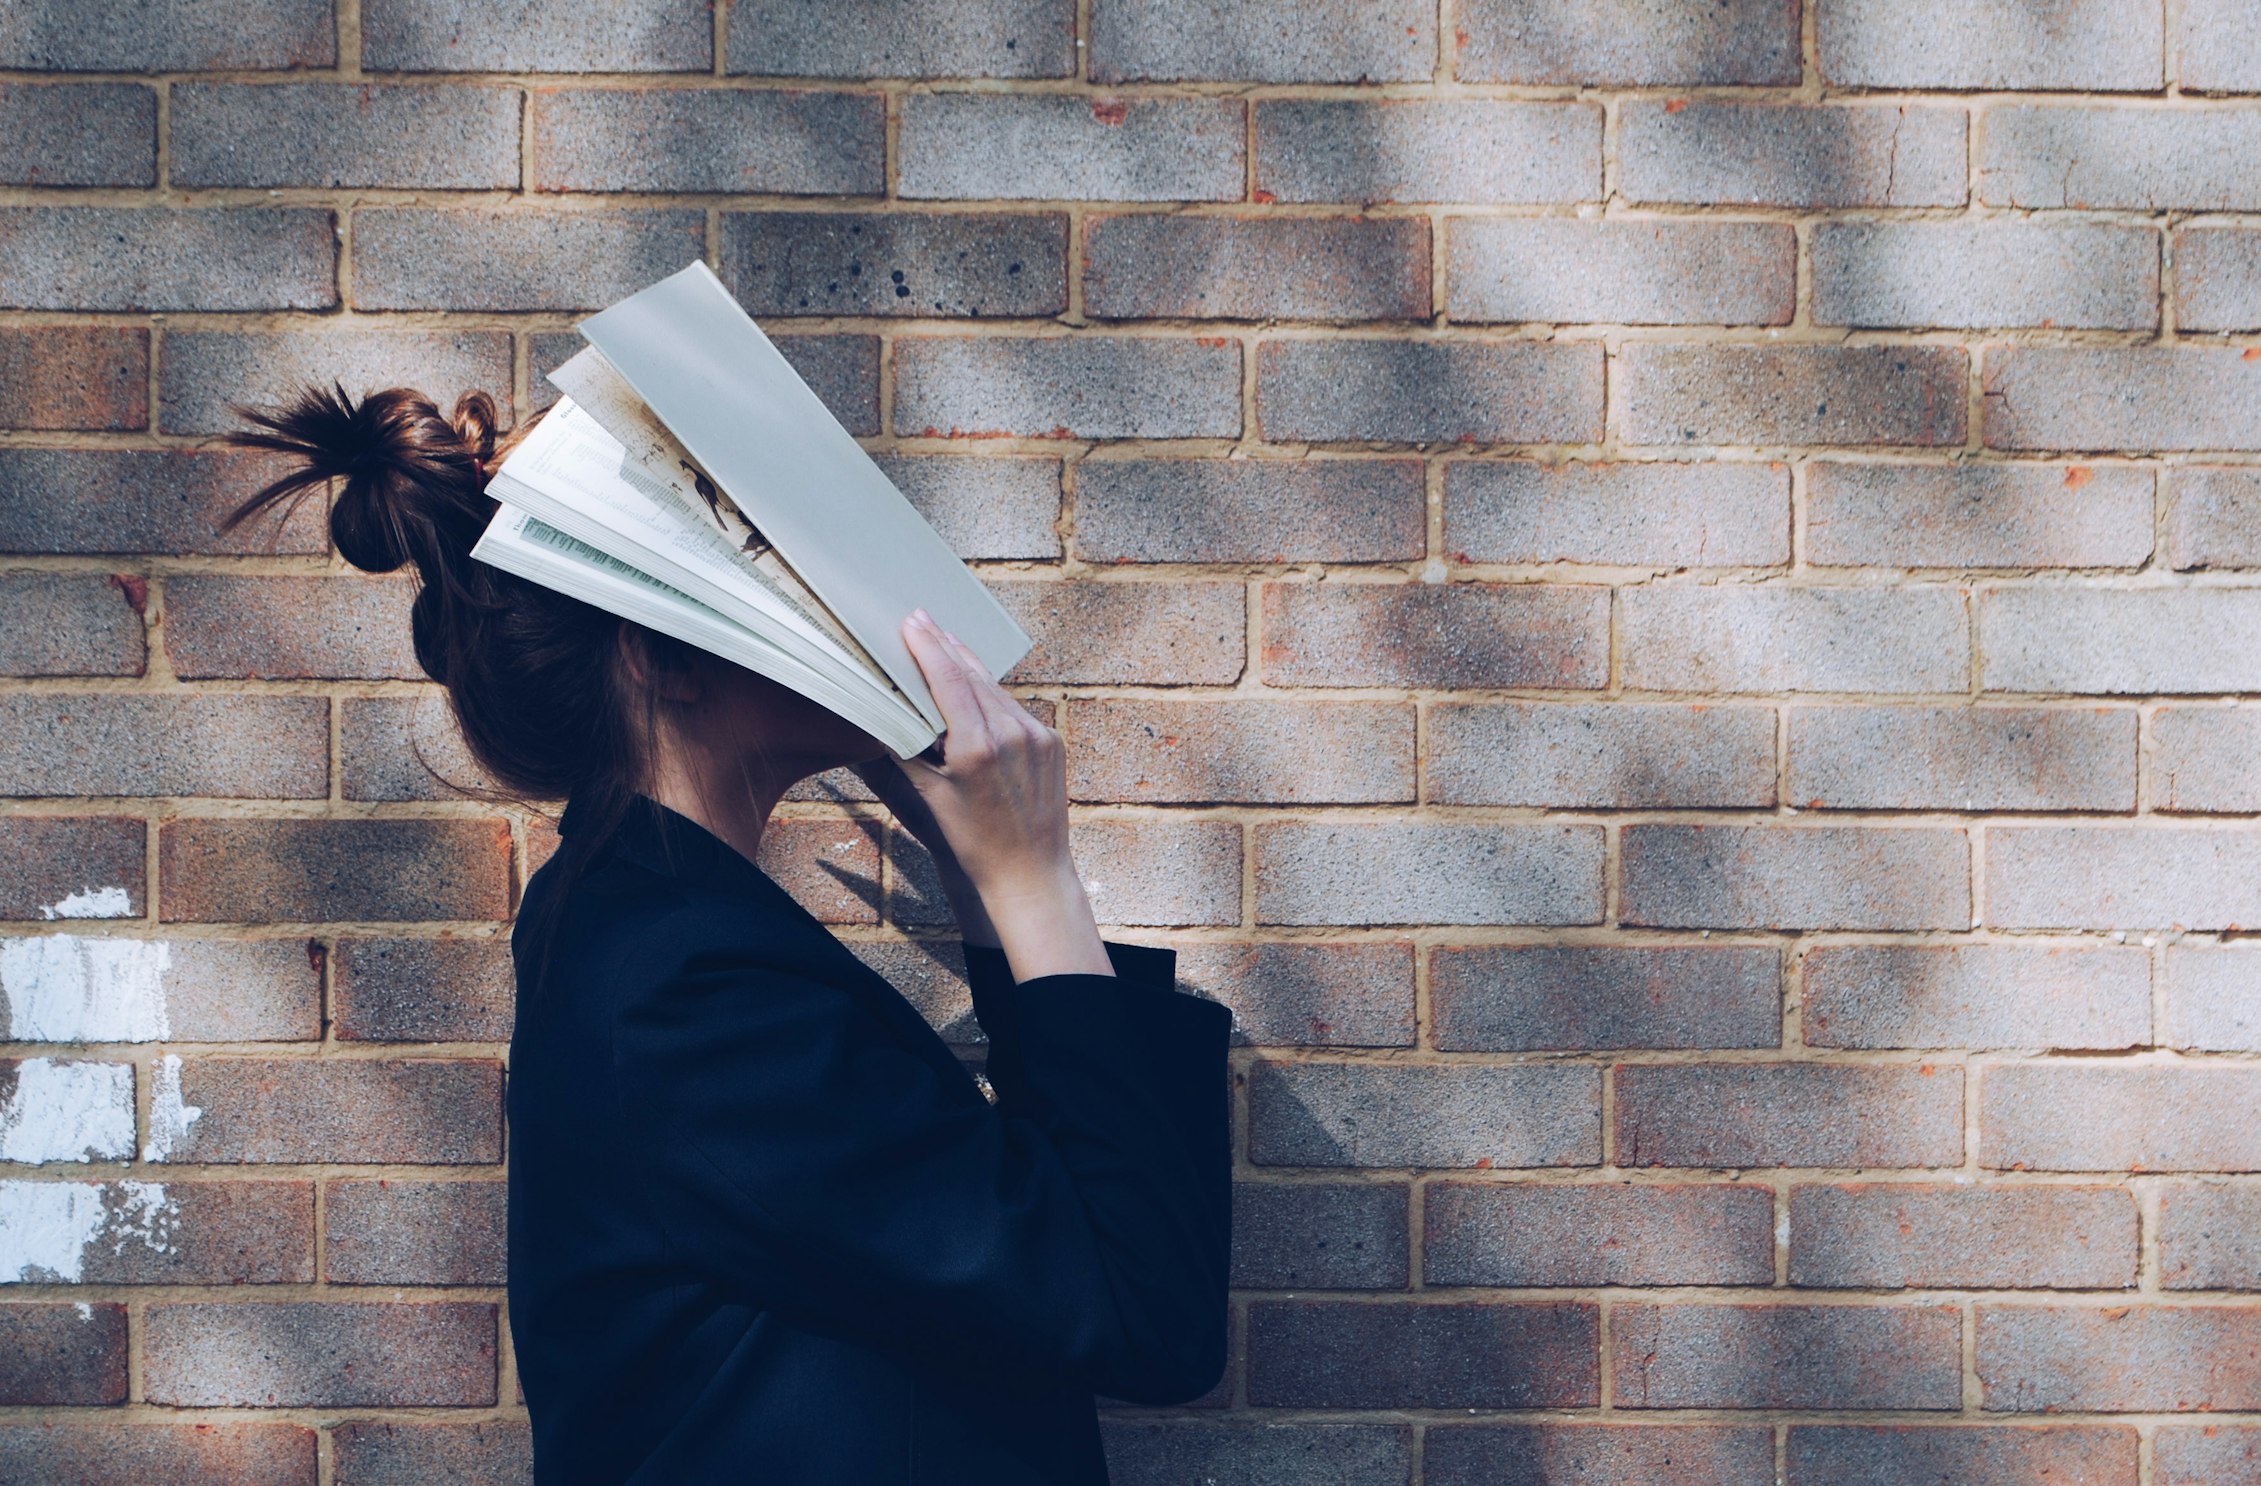 Girl stood next to a brick wall, holding a book over her face.